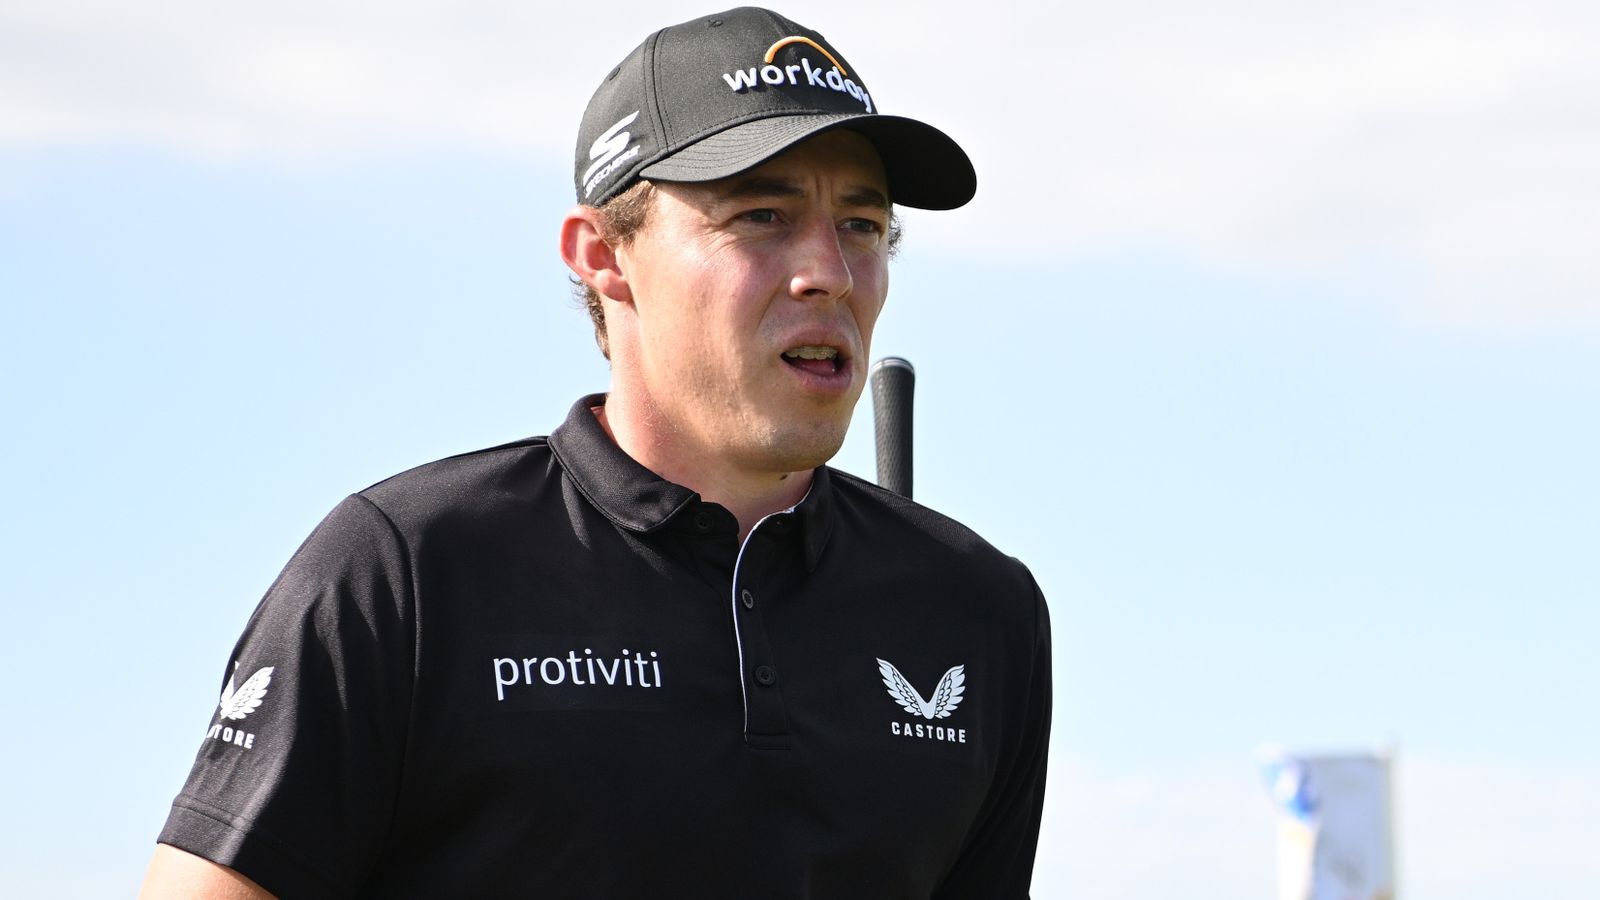 Andalucia Masters: Matt Fitzpatrick eight off lead but vows ‘aggressive approach’ at Valderrama